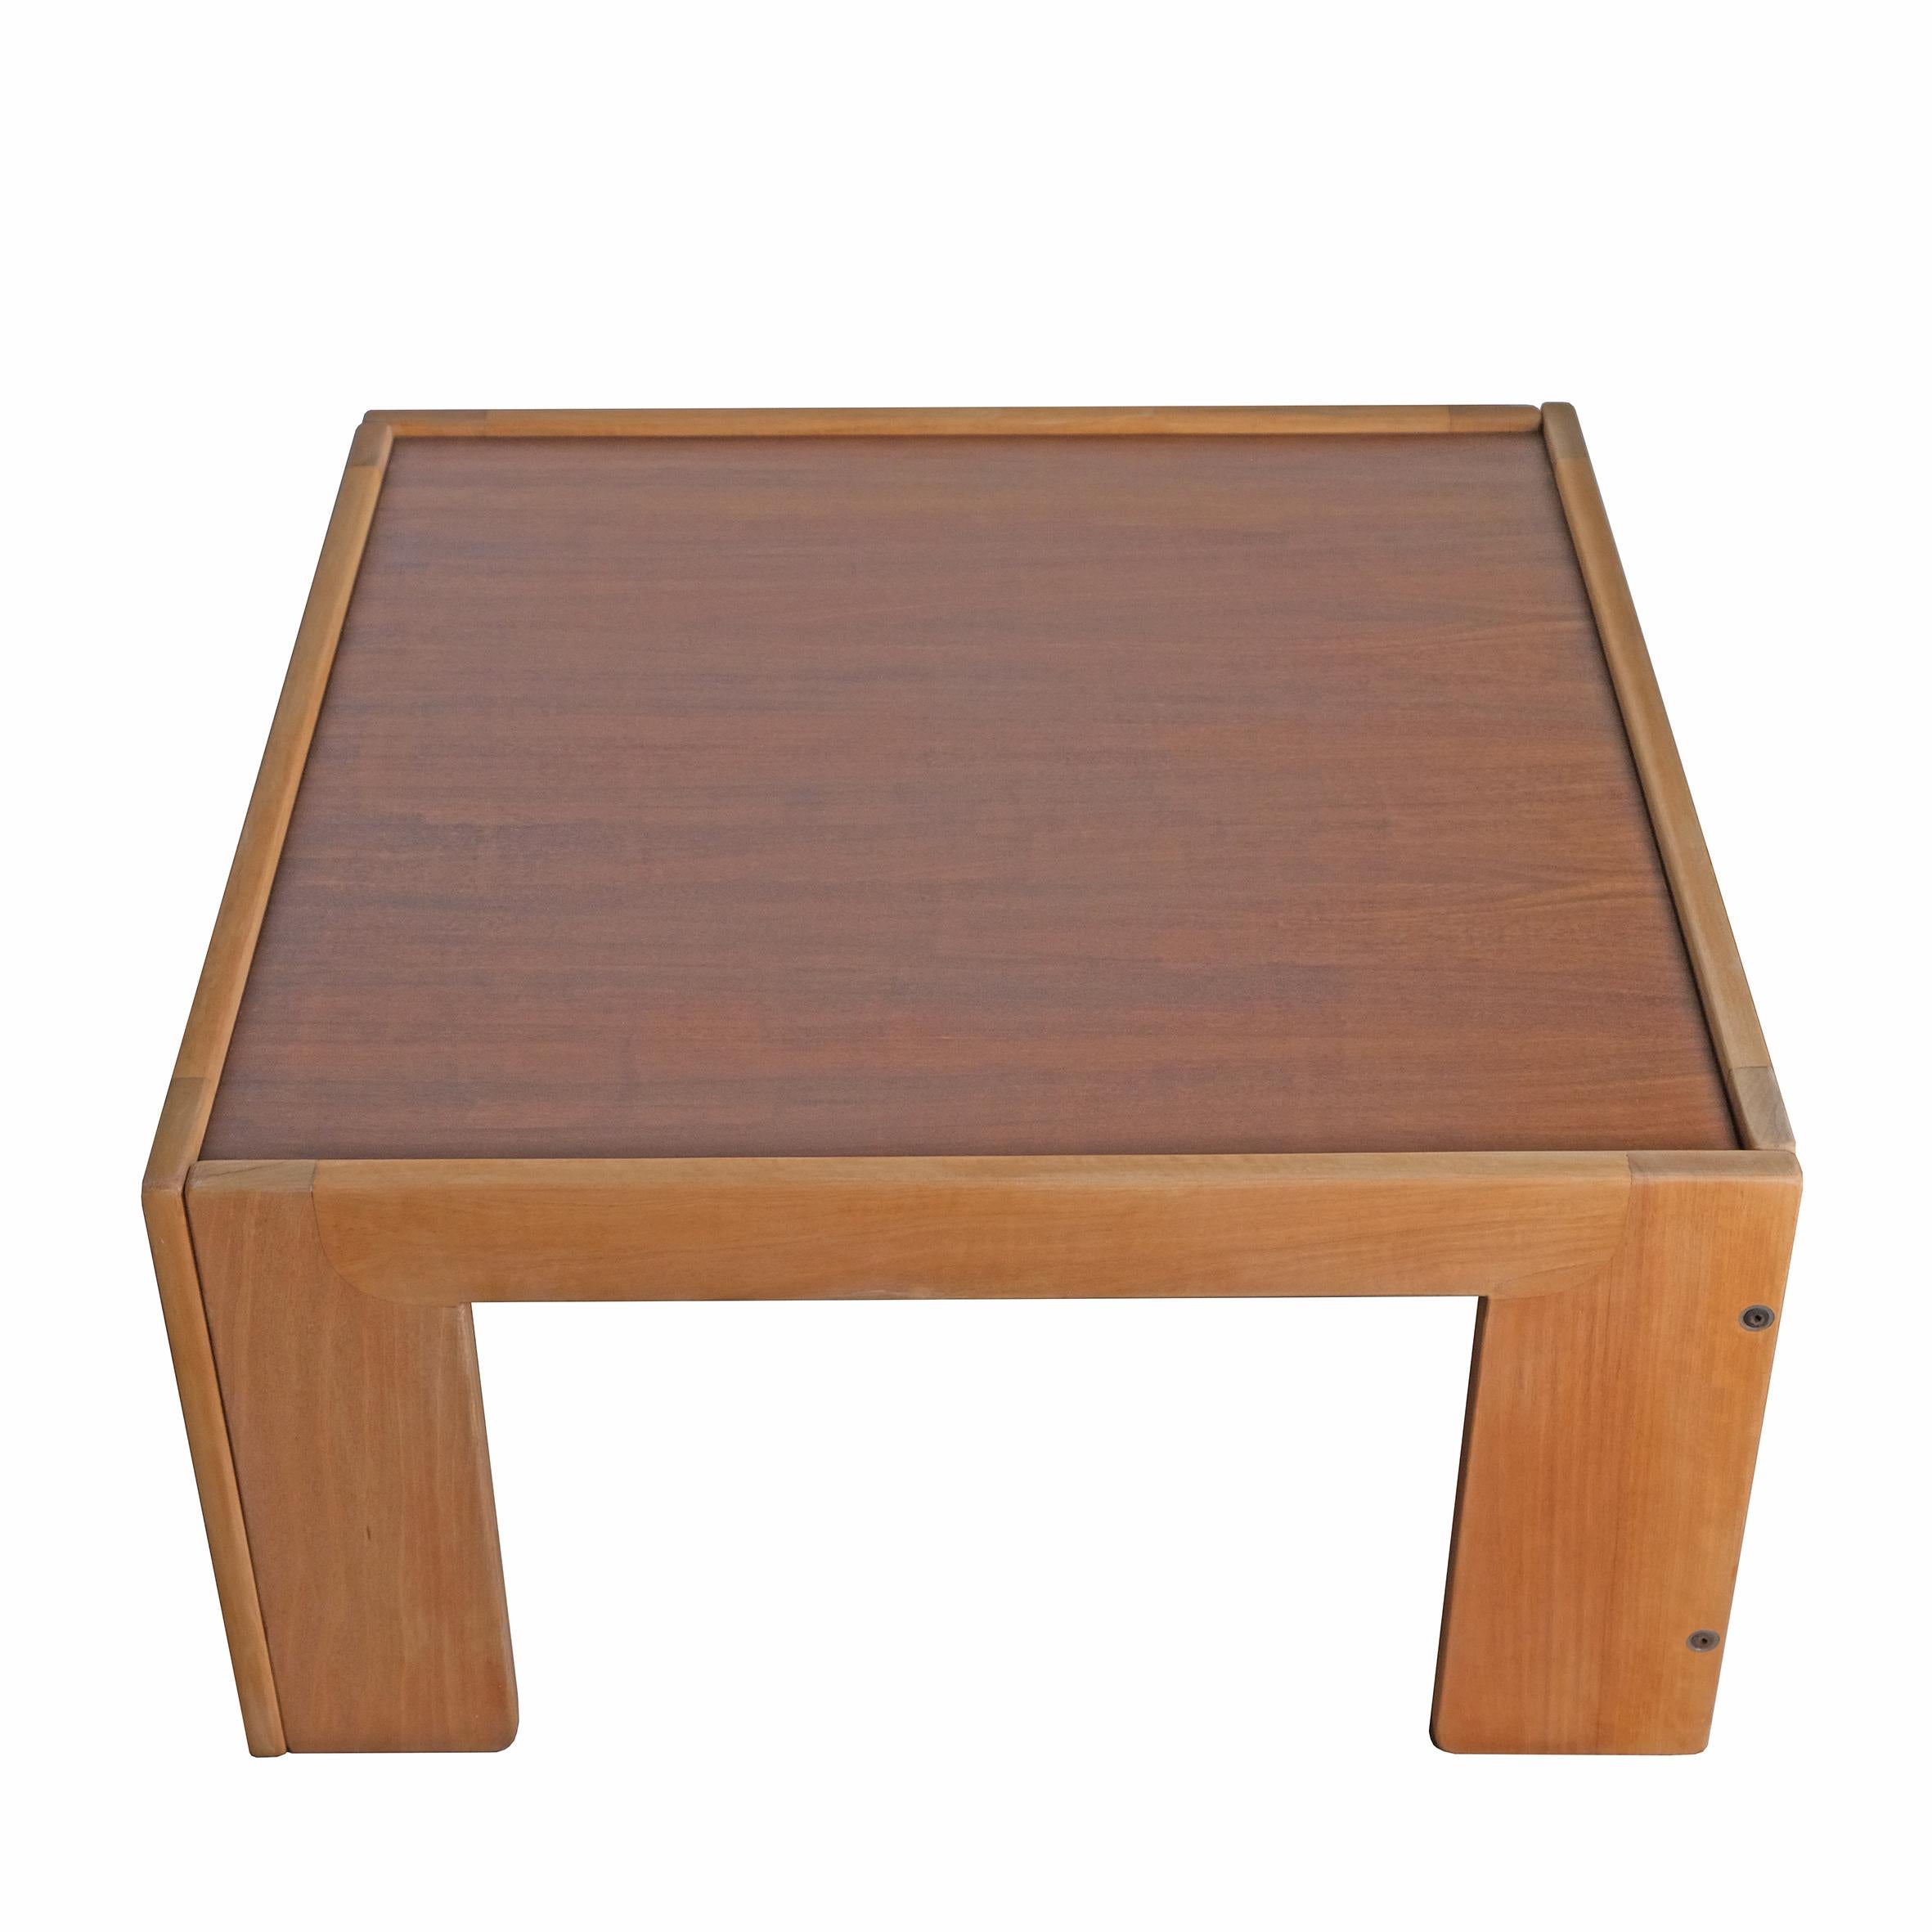 A square walnut low table, the top plate rested on the frame supported by four rectangular feet.
Manufactured by Cassina.
Italy,
1960s.

Provenance
Private collection

Literature
Domus 453, agosto 1967, p.54

Domus 455, ottobre 1967,